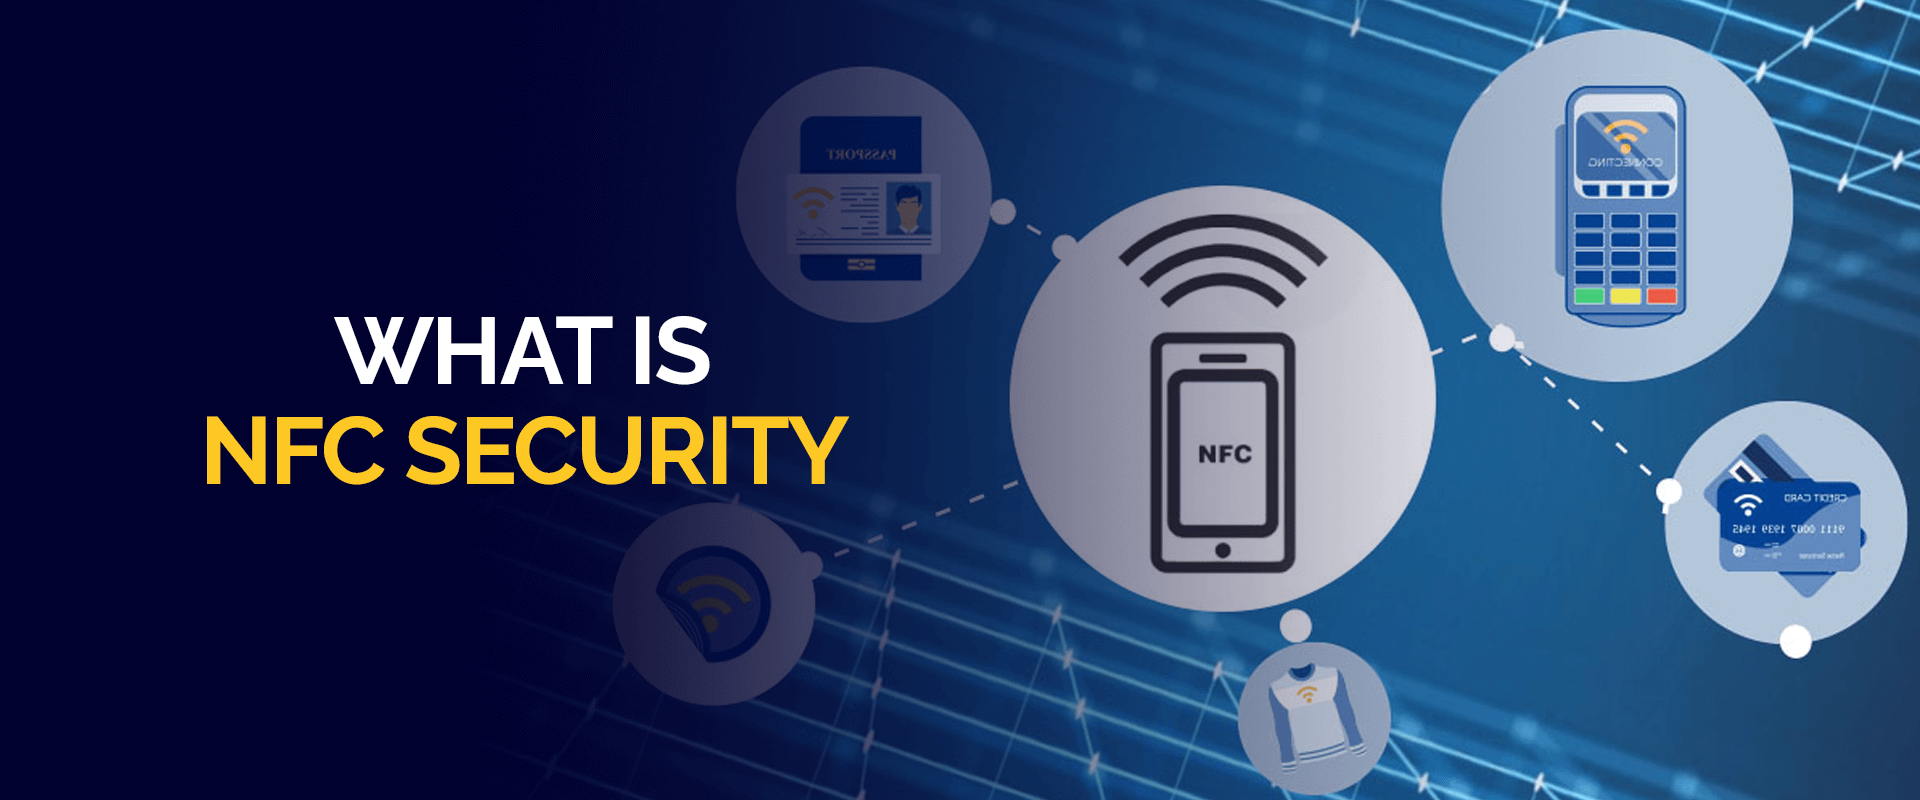 What is NFC Security